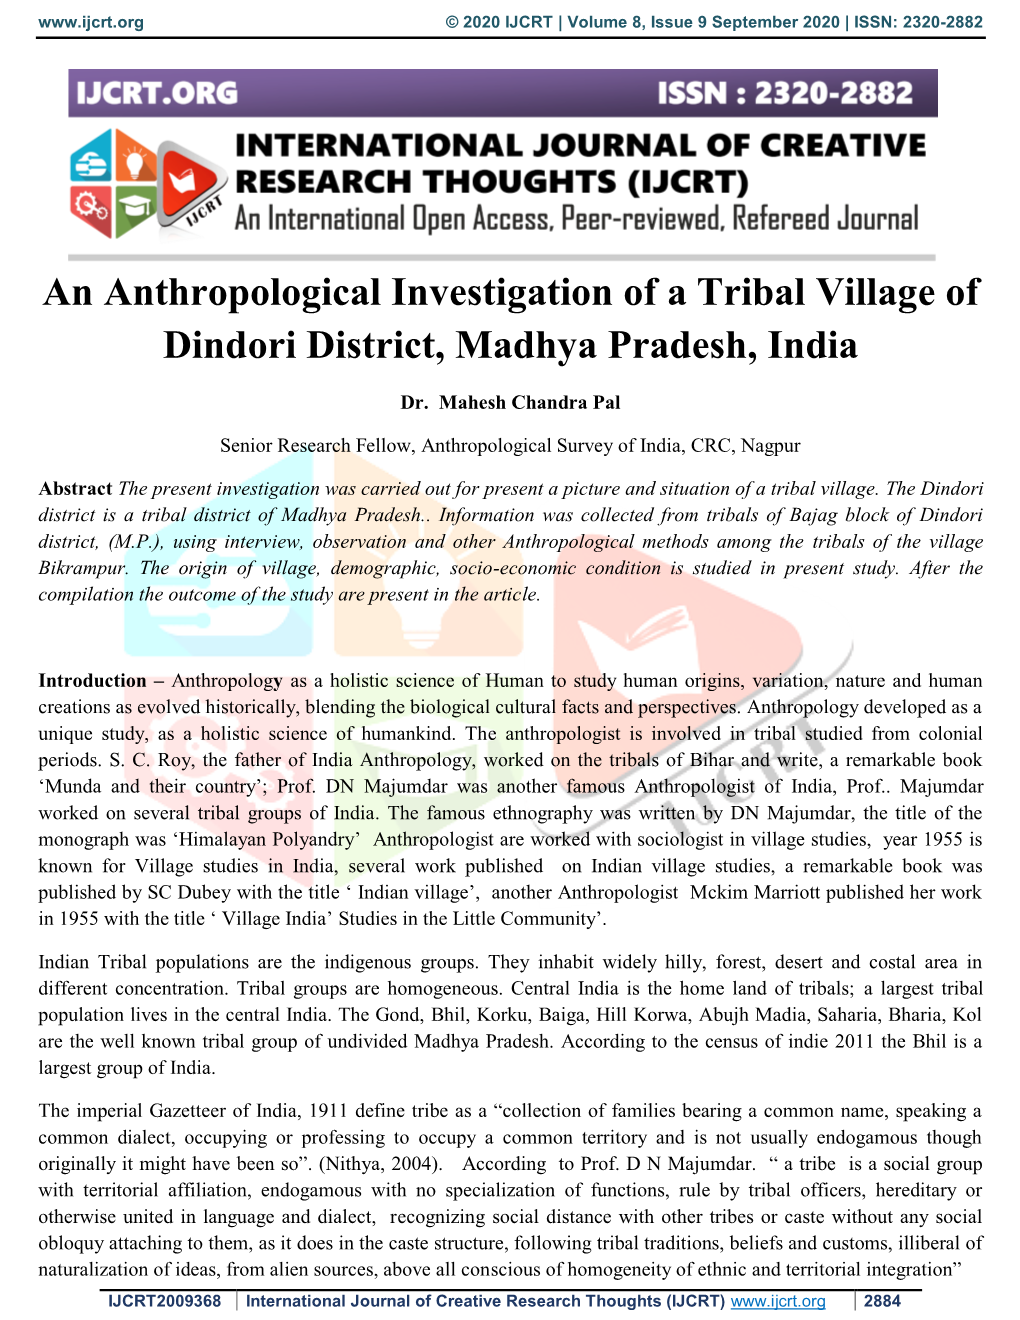 An Anthropological Investigation of a Tribal Village of Dindori District, Madhya Pradesh, India